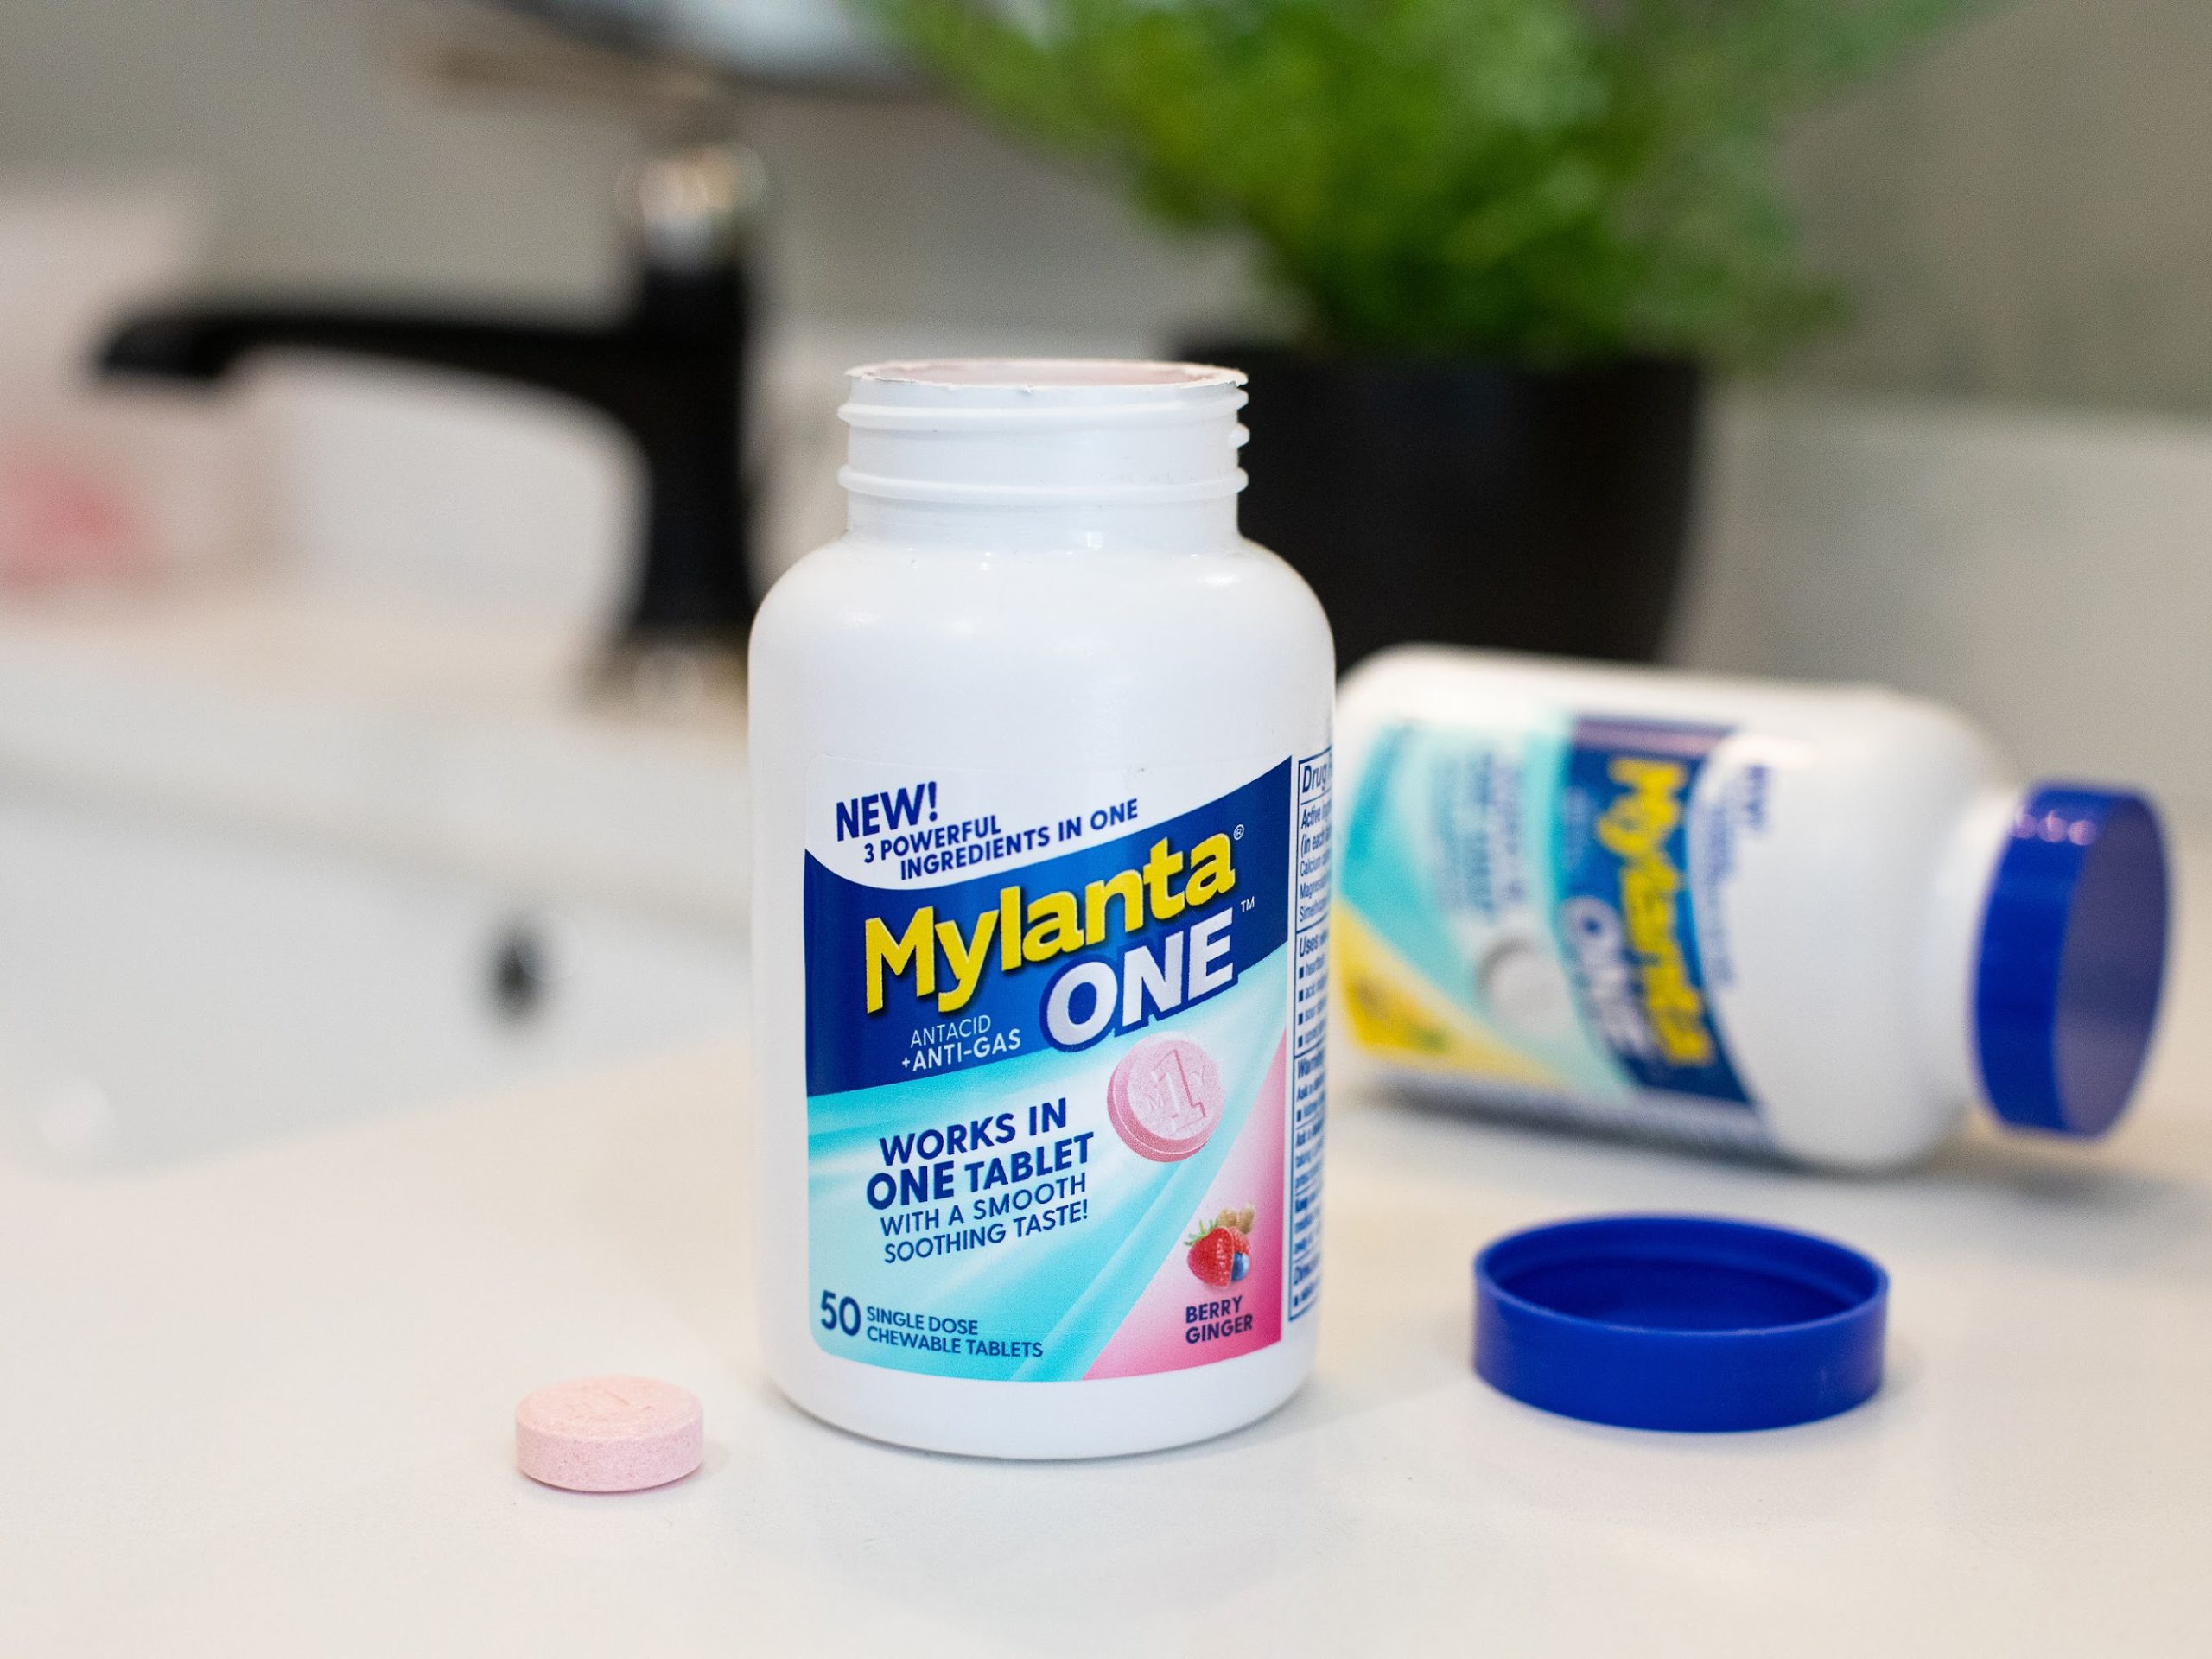 Mylanta ONE Is On Sale Now At Publix - One Bottles Gives You THREE Powerful Ingredients In ONE! on I Heart Publix